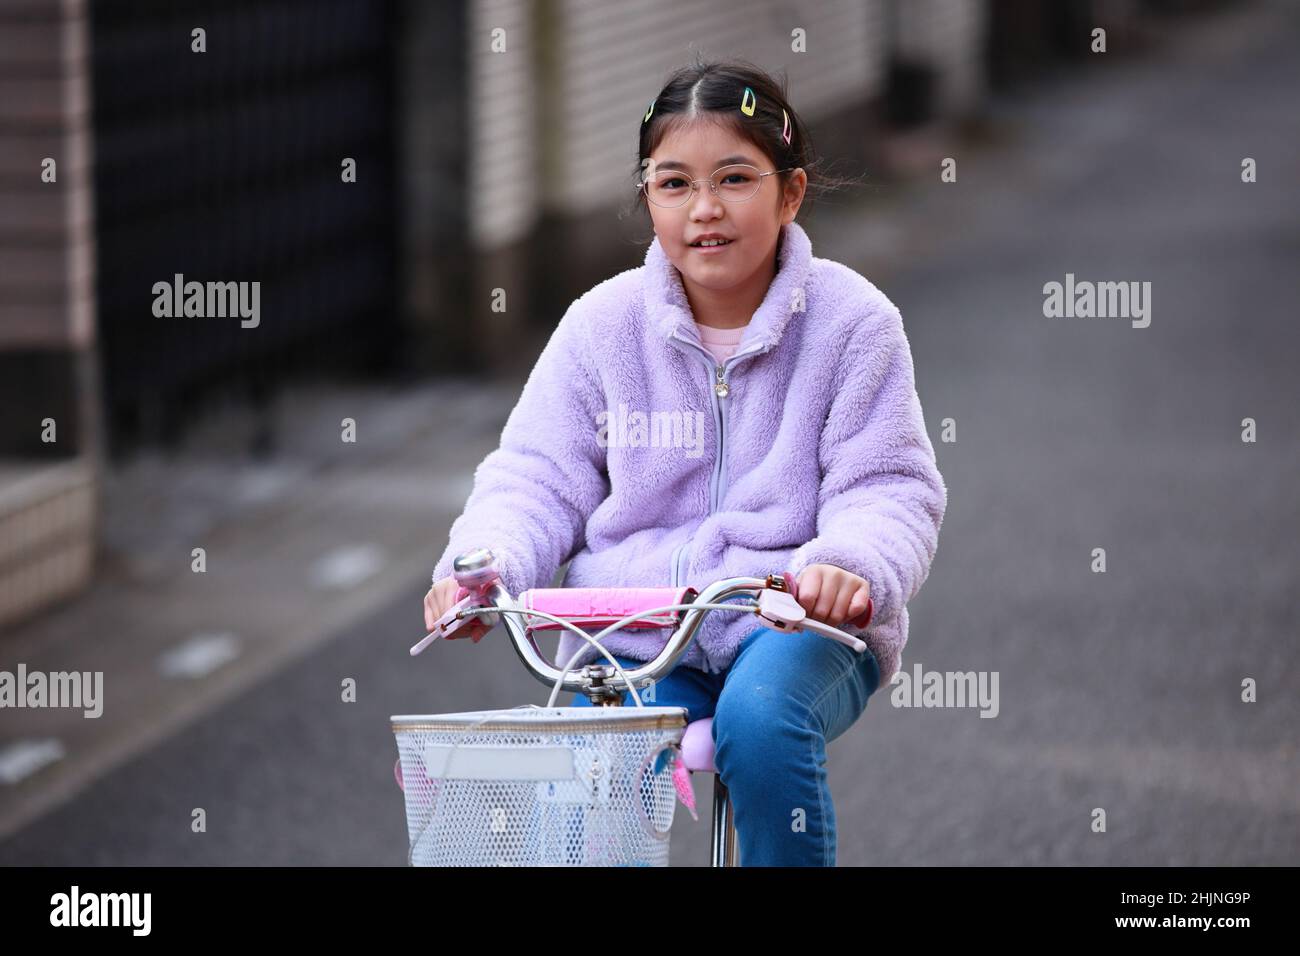 Child Riding on a Bicycle Stock Photo